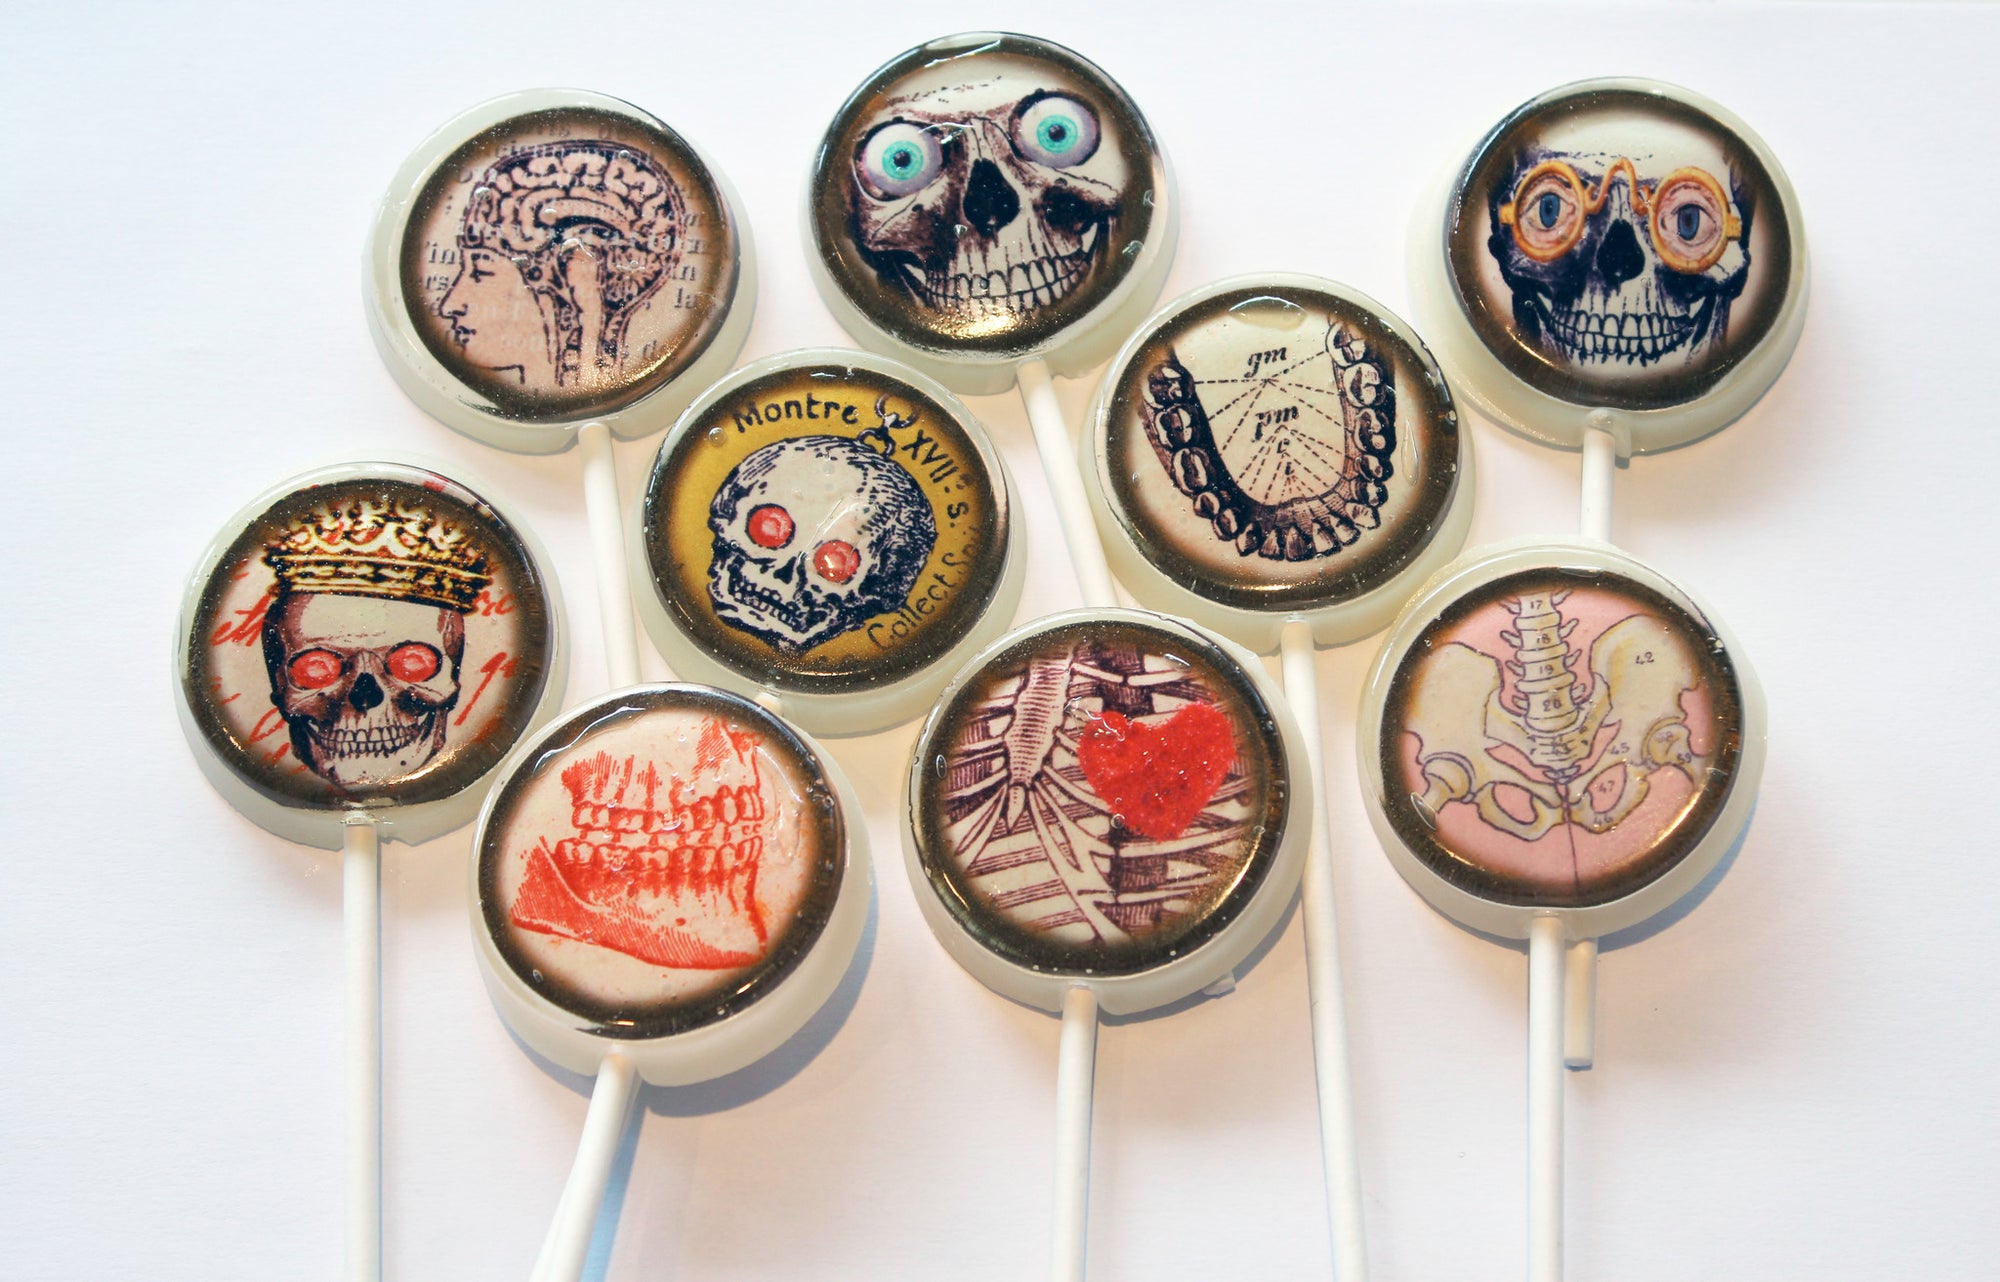 Skulls and Anatomy Lollipops 5-piece set by I Want Candy!